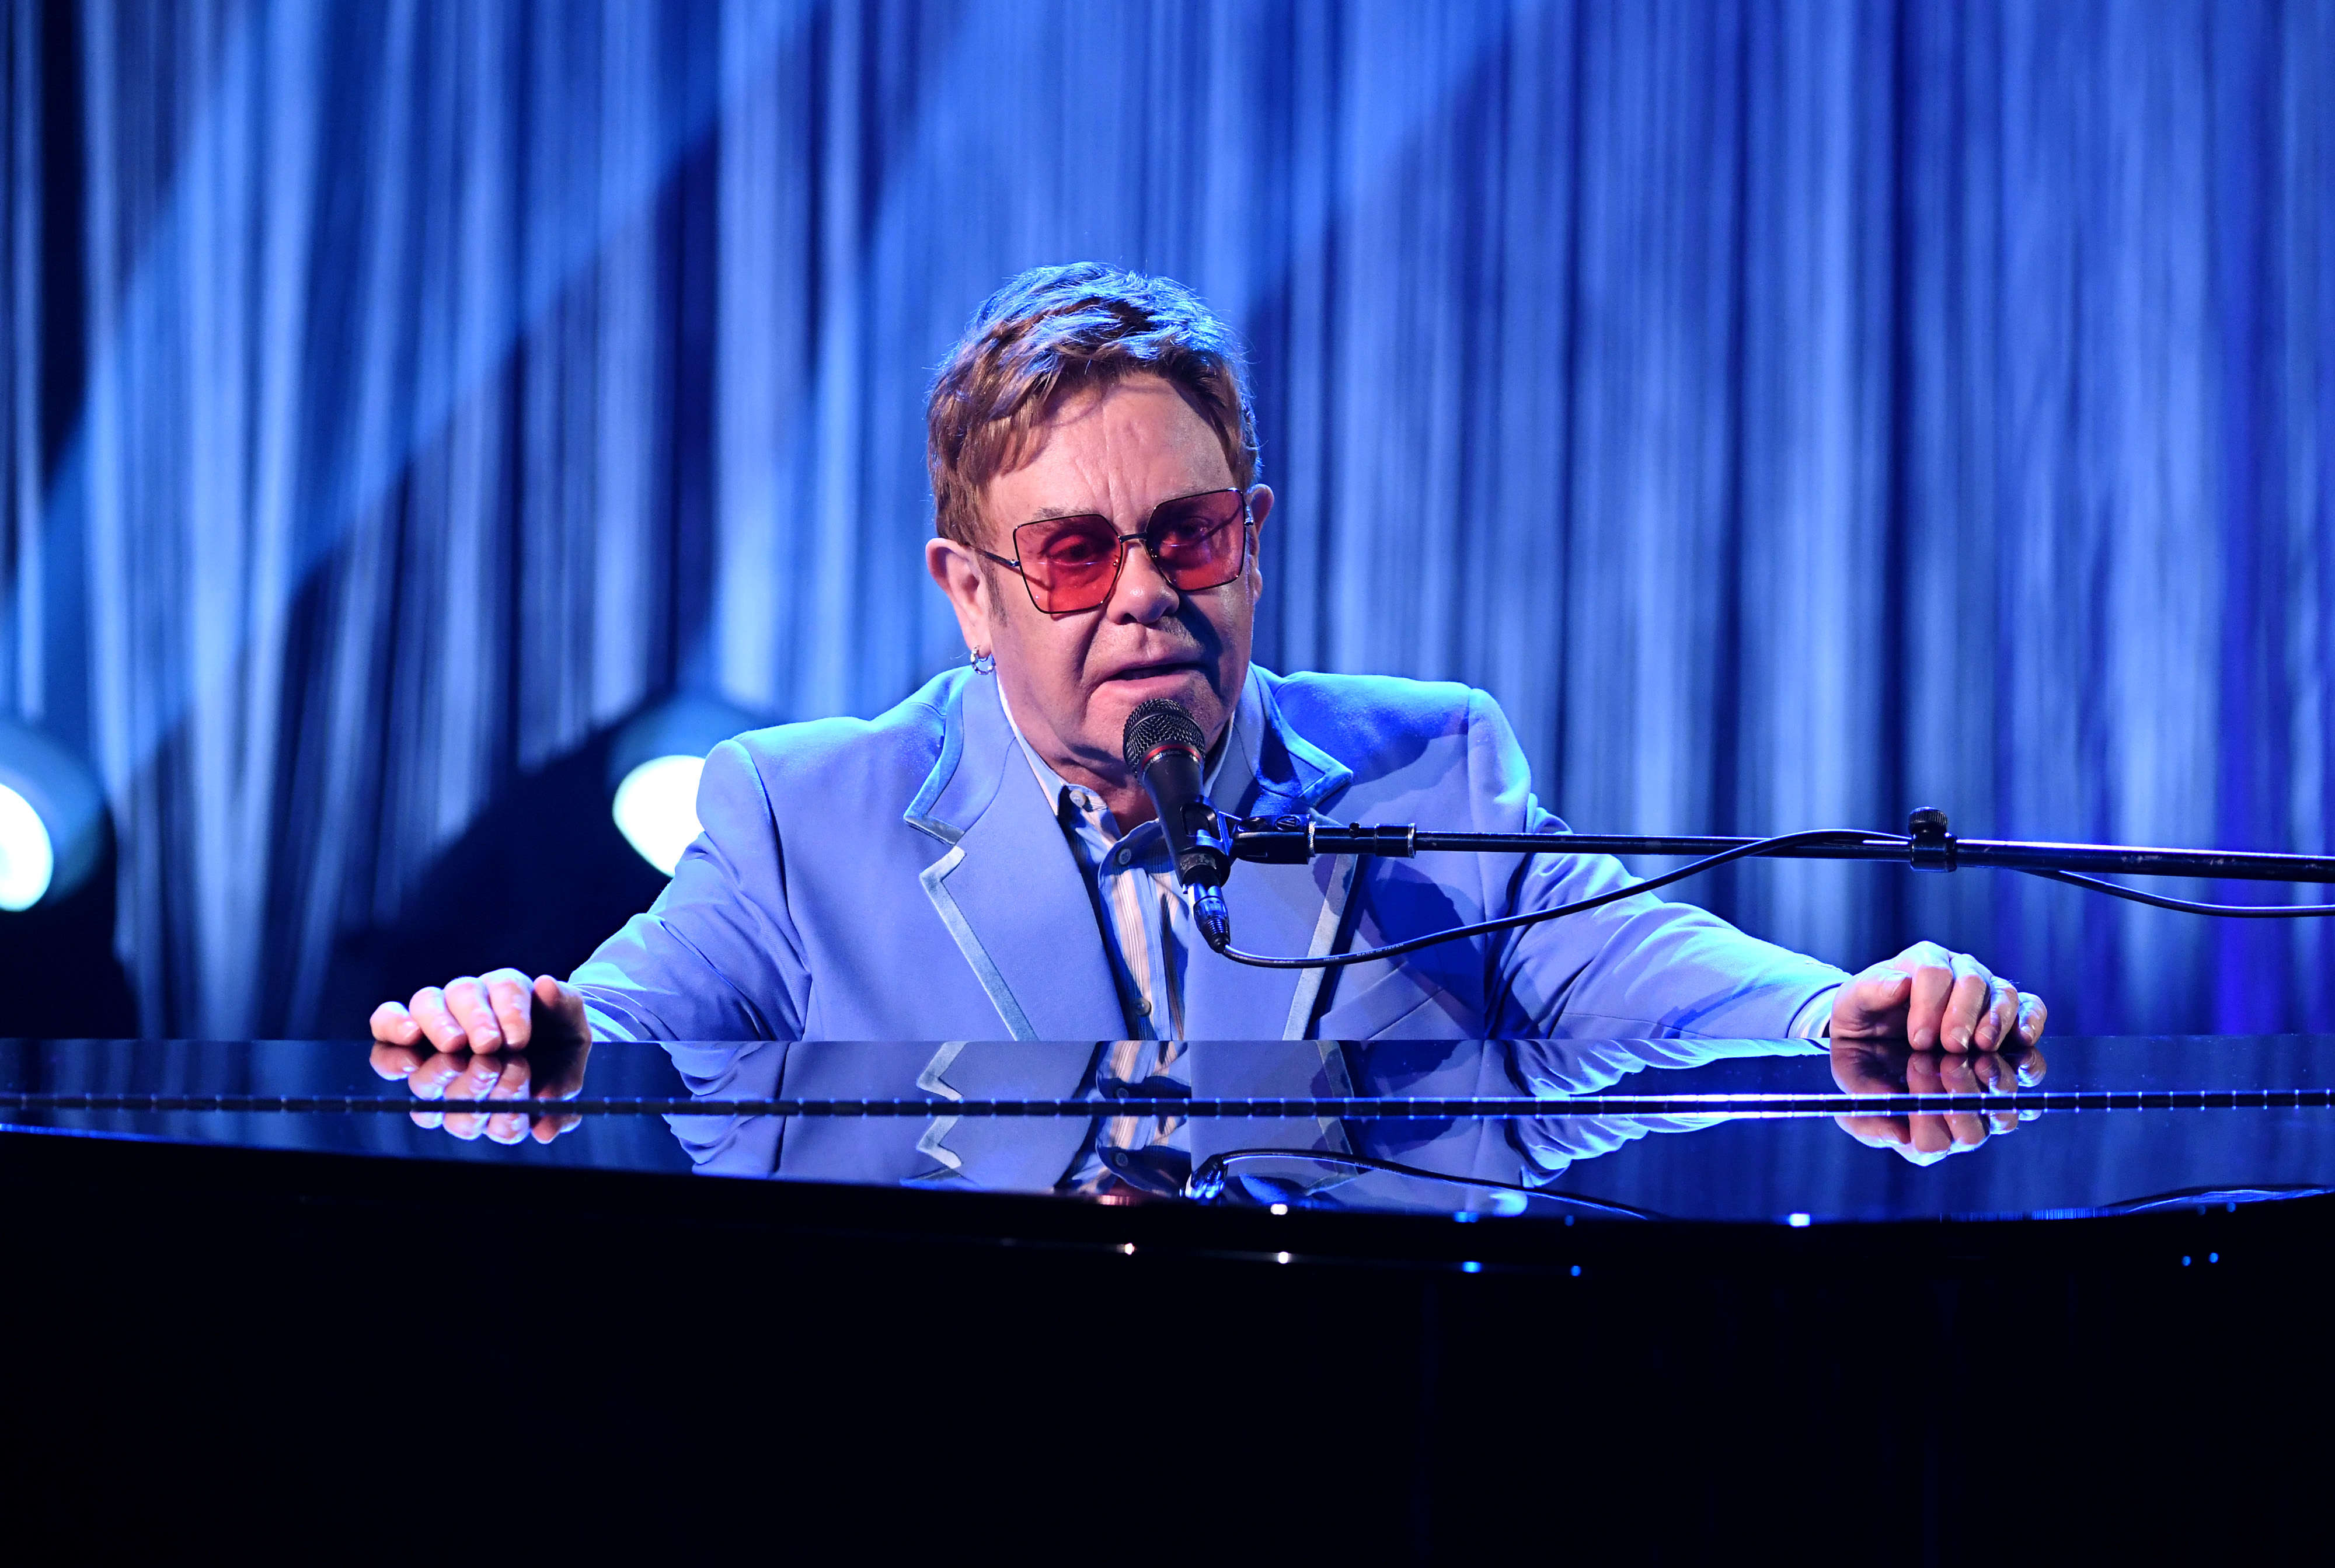 Elton John Once Wore A Diaper And “Pissed” Himself During Las Vegas Gig